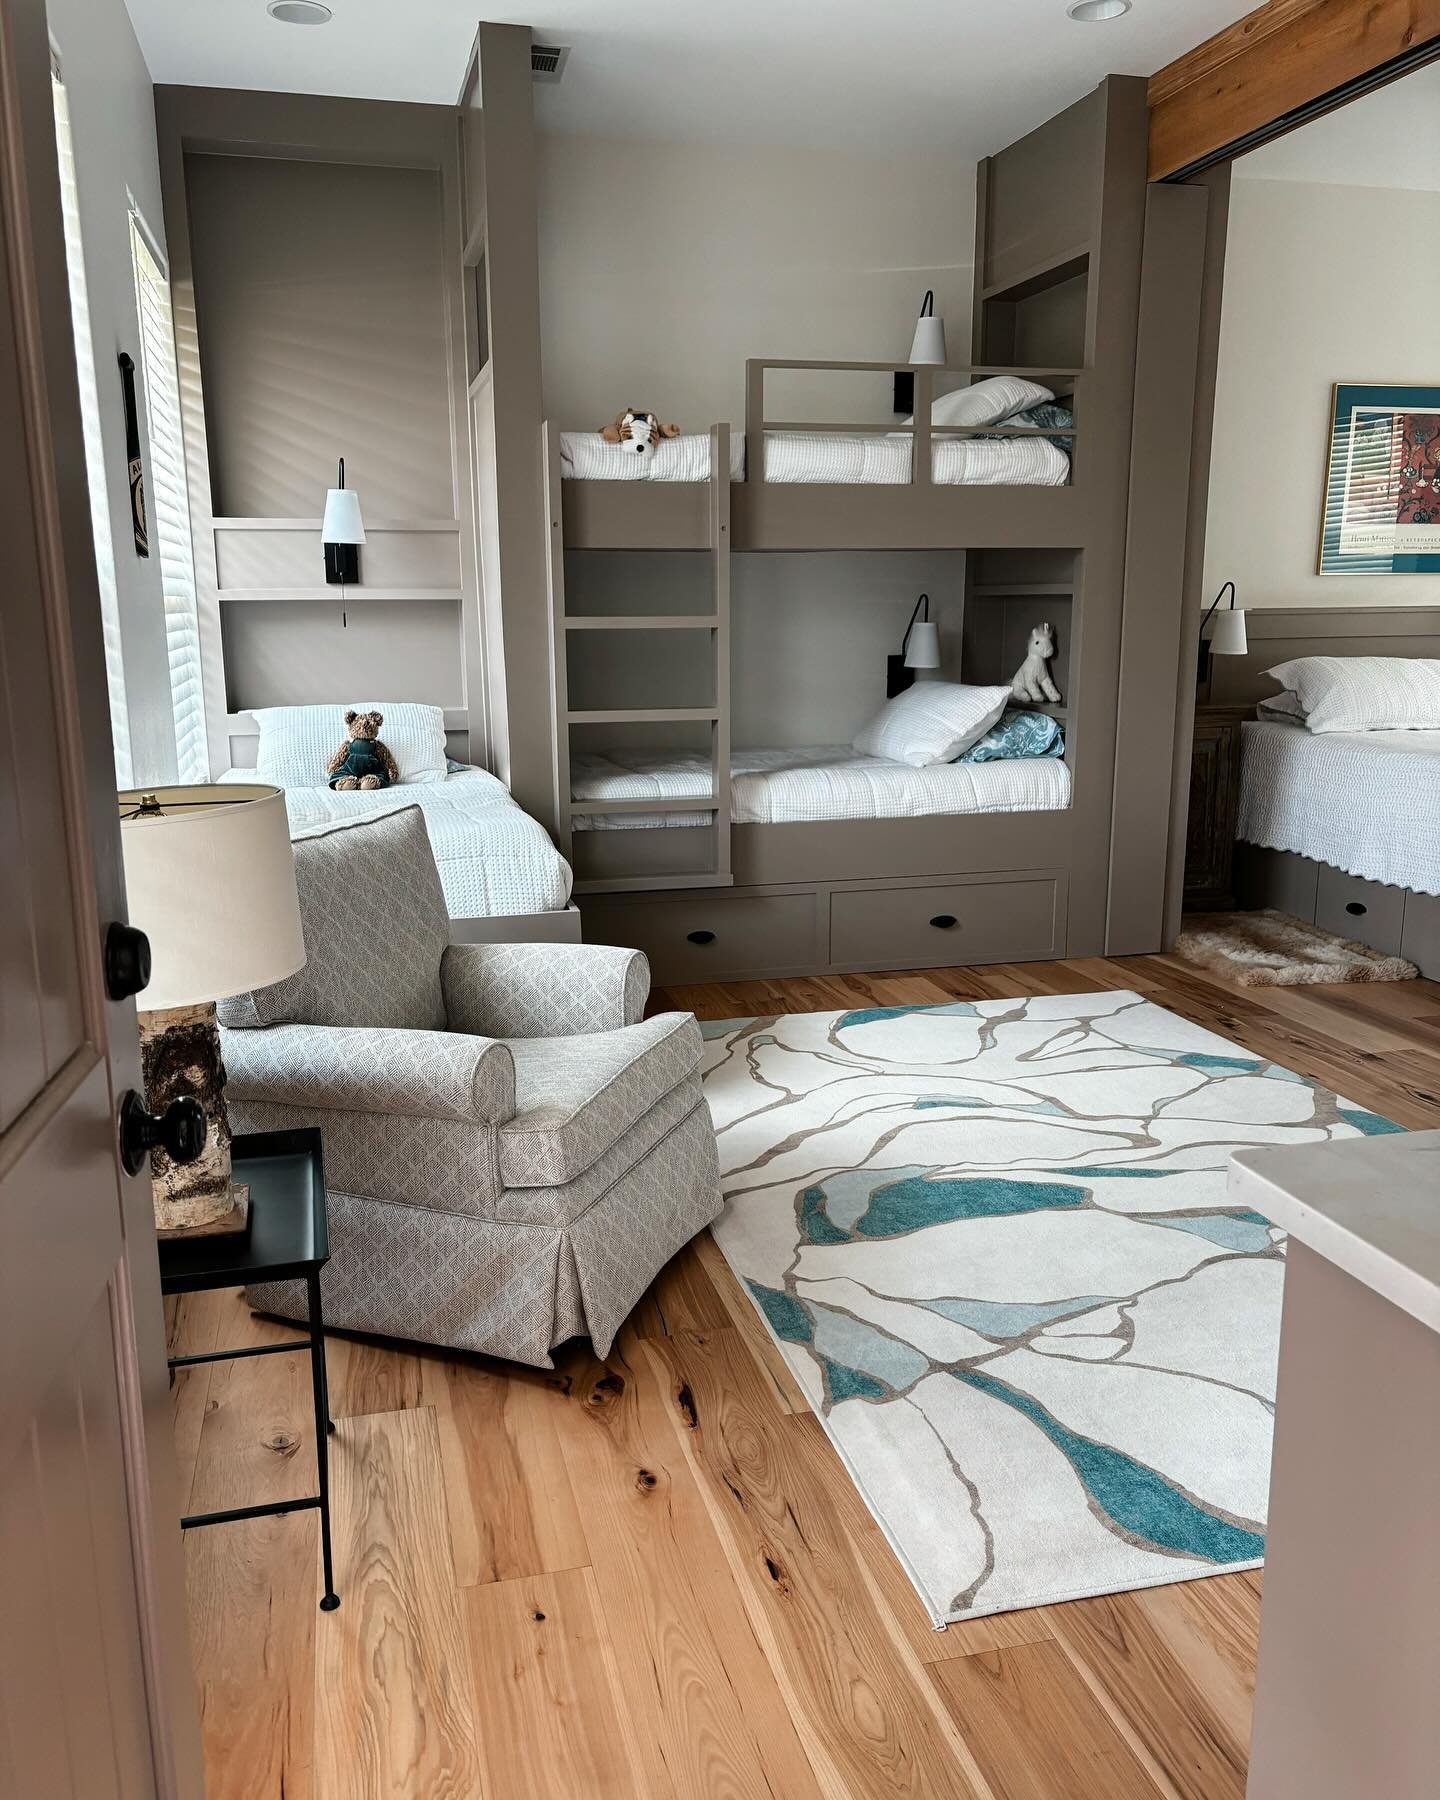 Part 1 of this Lake LBJ bunkhouse remodel 🐡⛵️🦆What started as a dated garage apartment is now a playful bunkhouse that sleeps 6. The custom built-in beds include drawers underneath for added storage, a trundle bed, lamps, outlets and shelves by eac